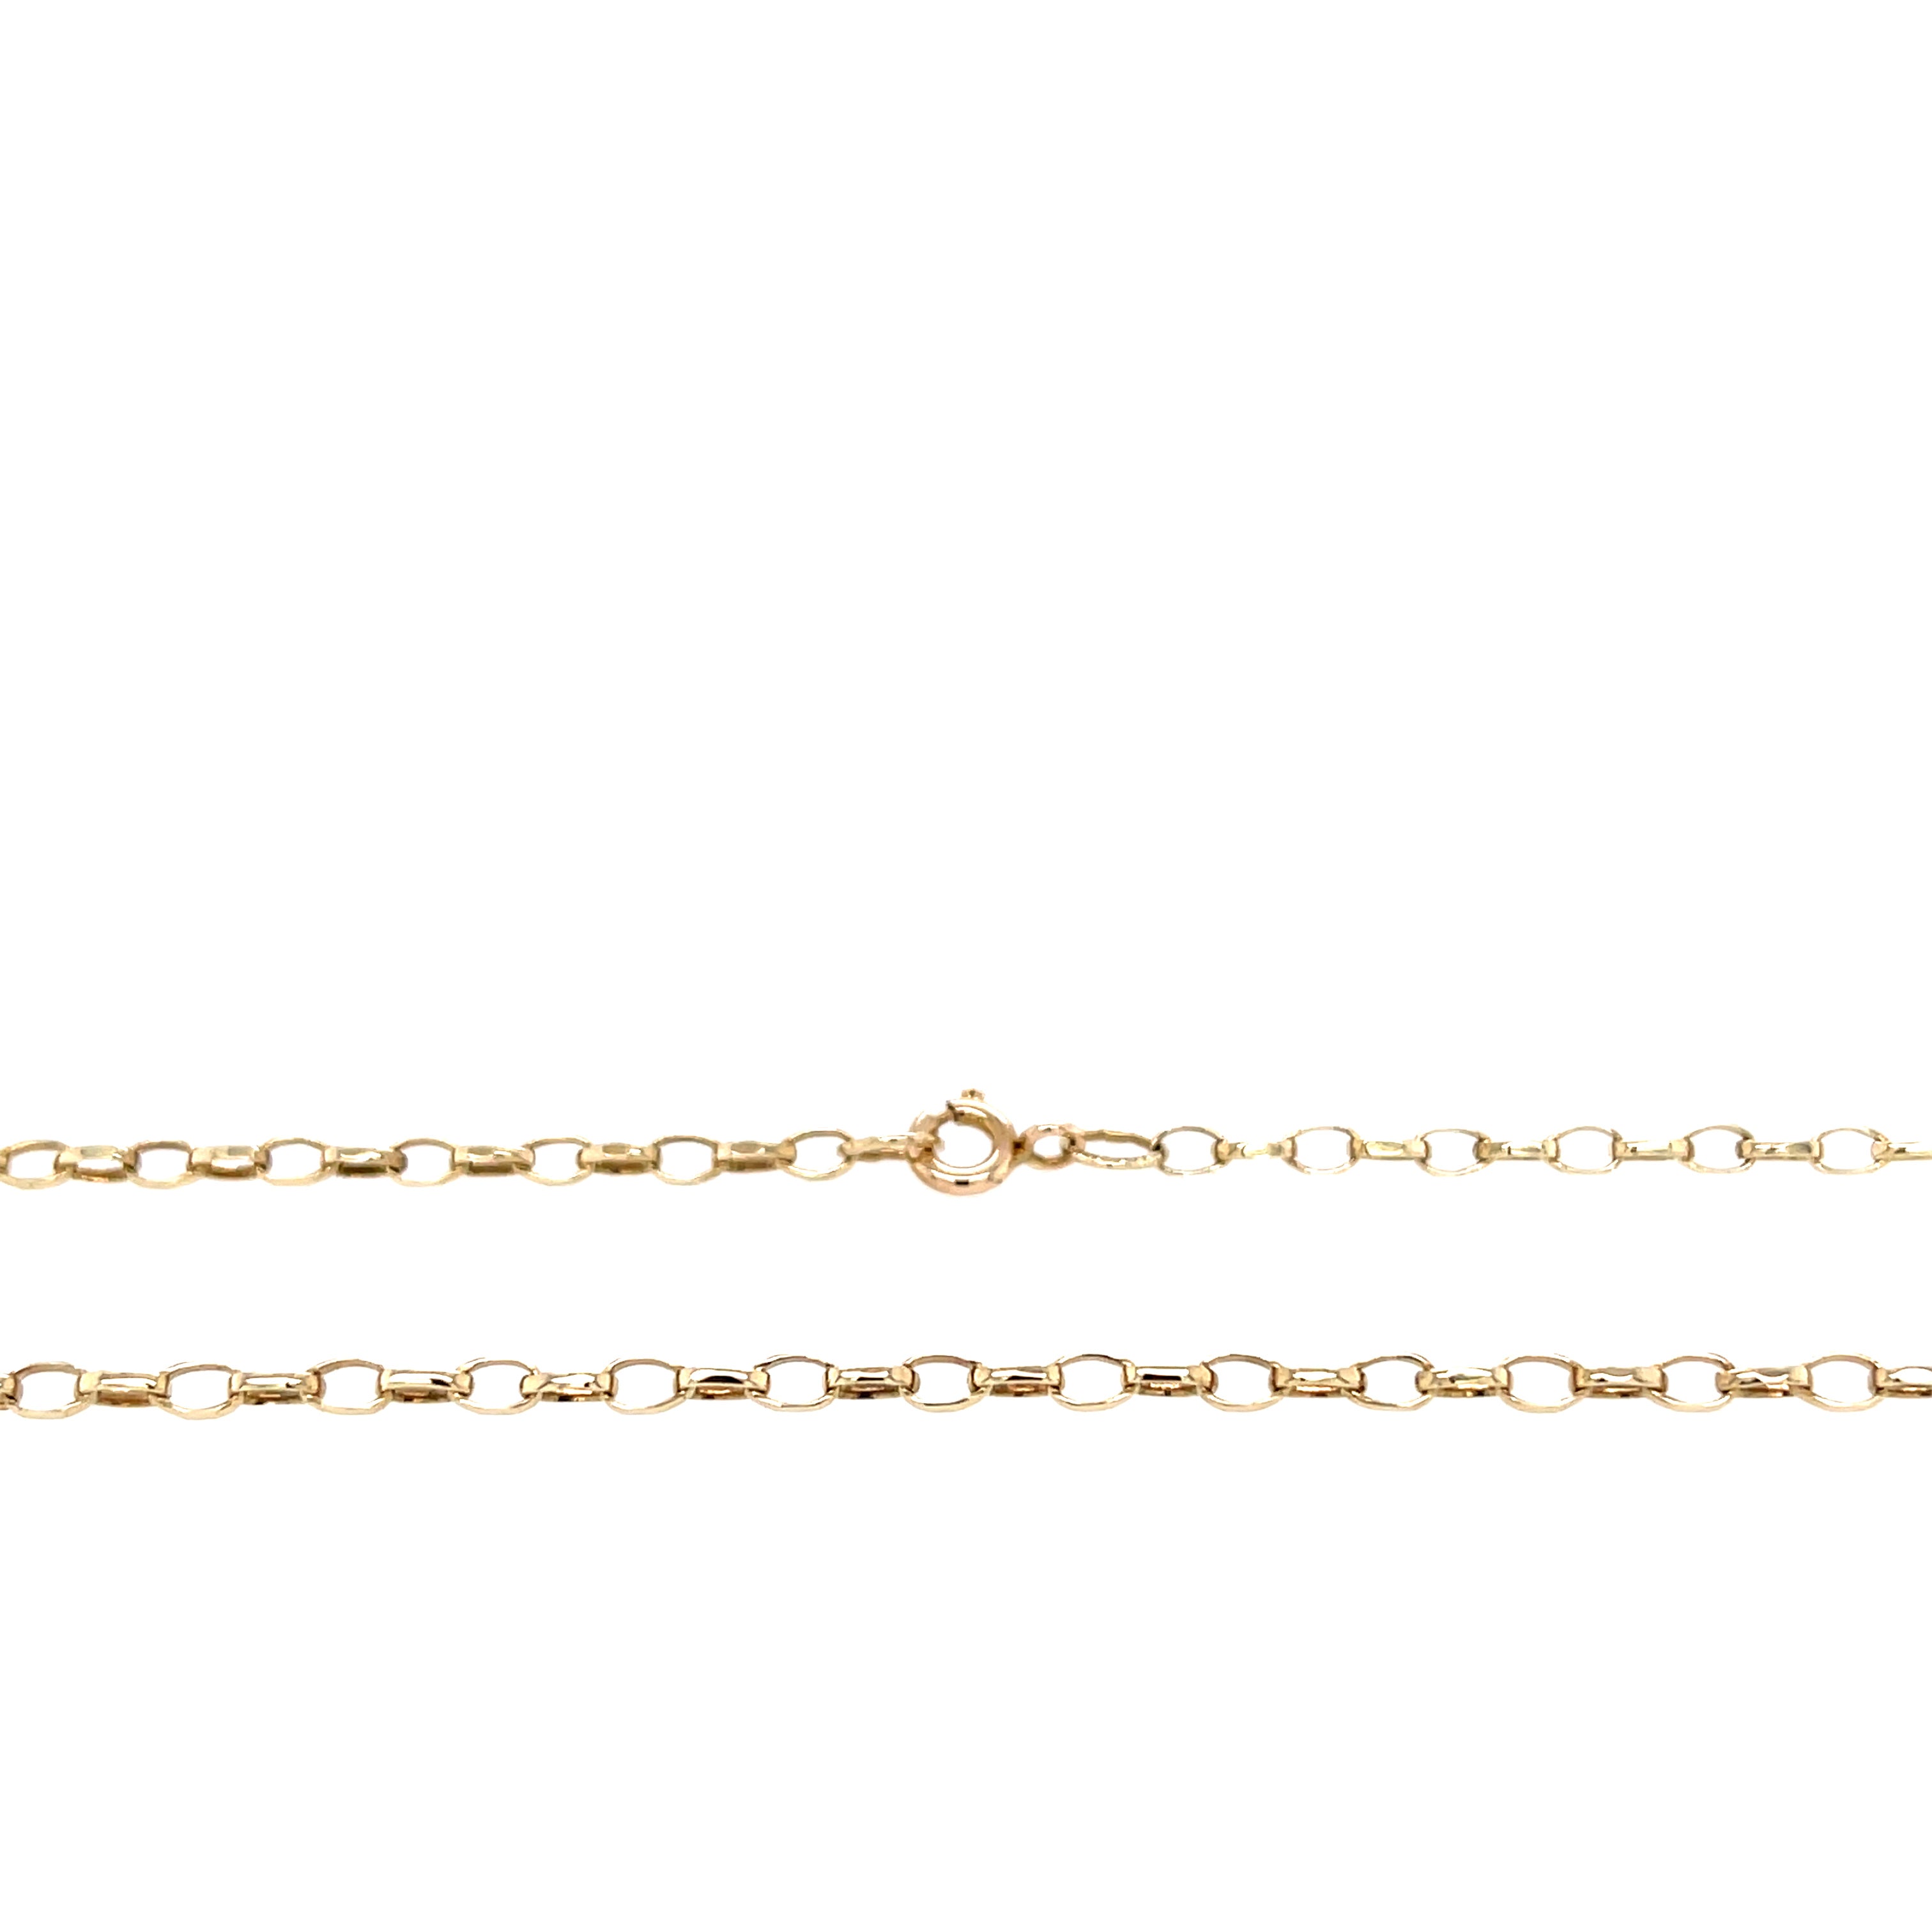 9ct Yellow Gold 18" Oval Belcher Link Chain - 3.82g SOLD